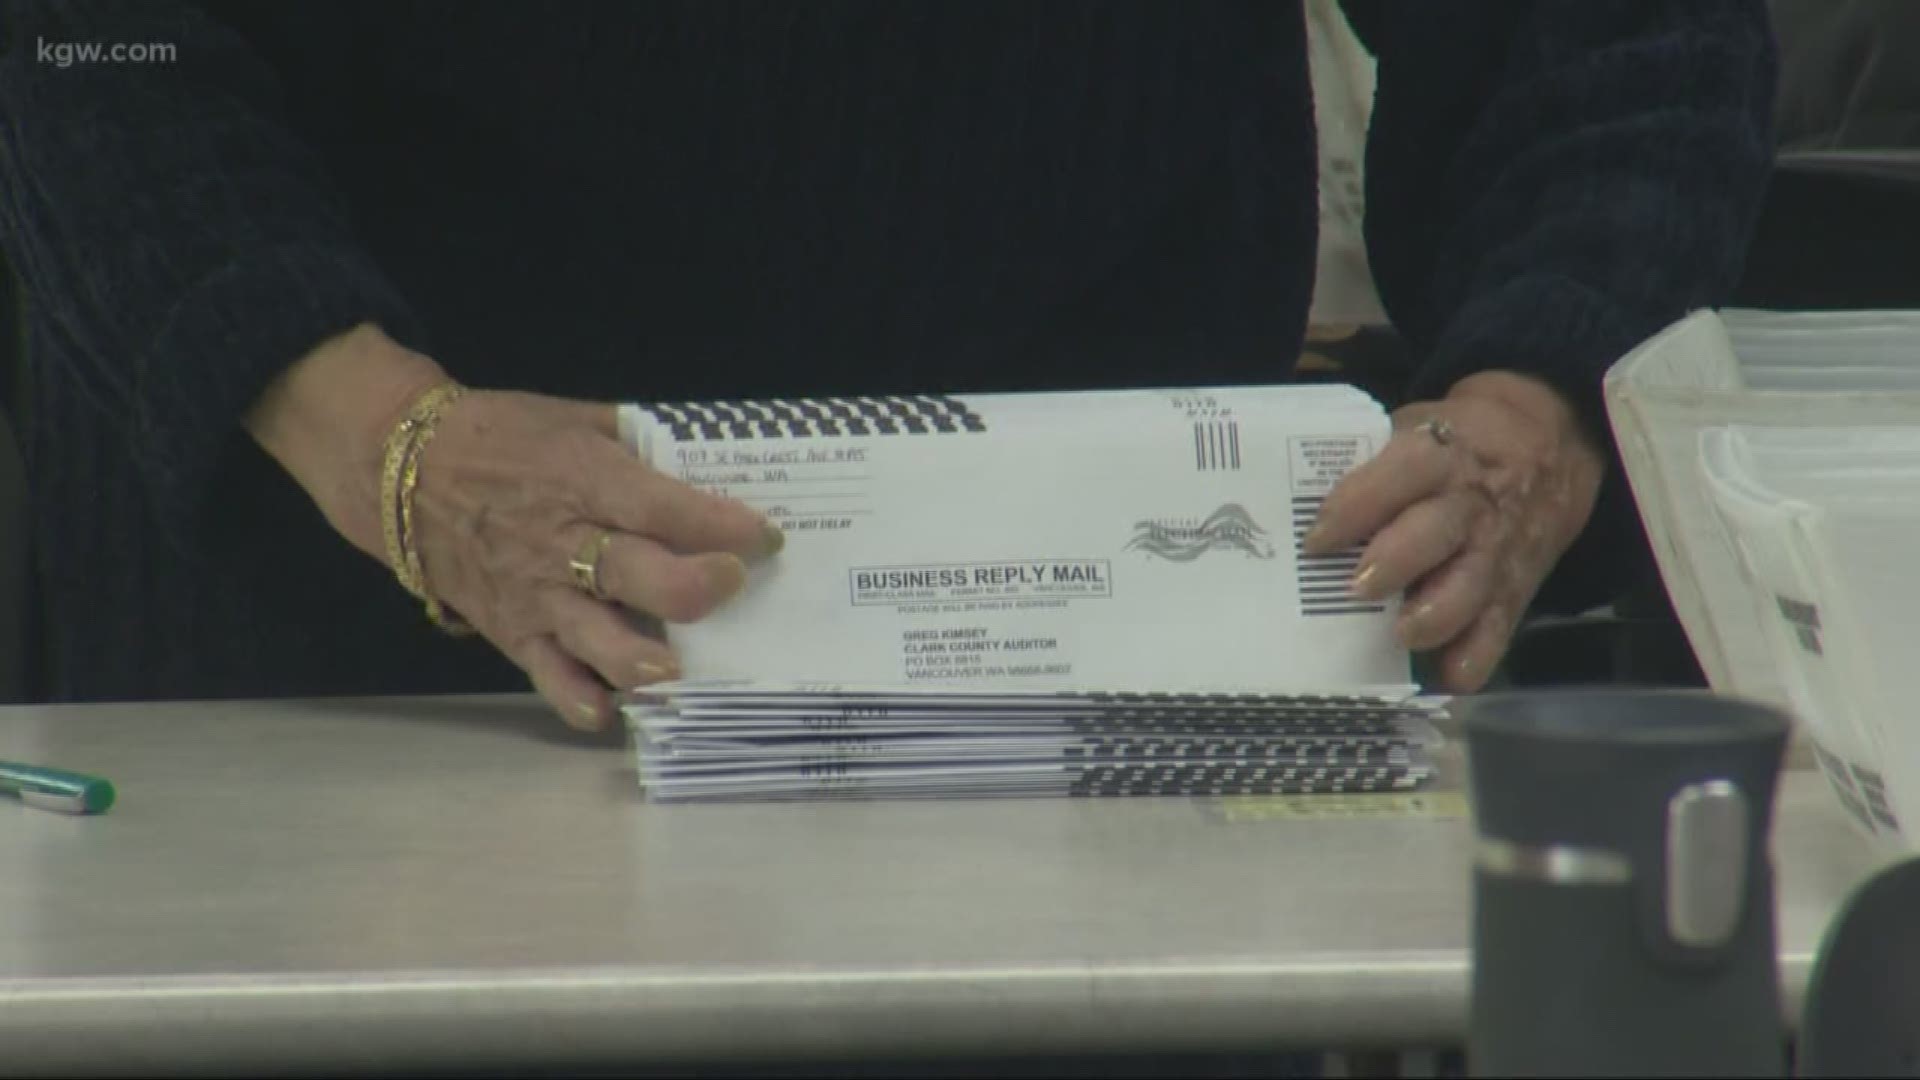 “It's unusual, it's different than any other primary we do in Washington,” said Clark County Auditor Greg Kimsey.